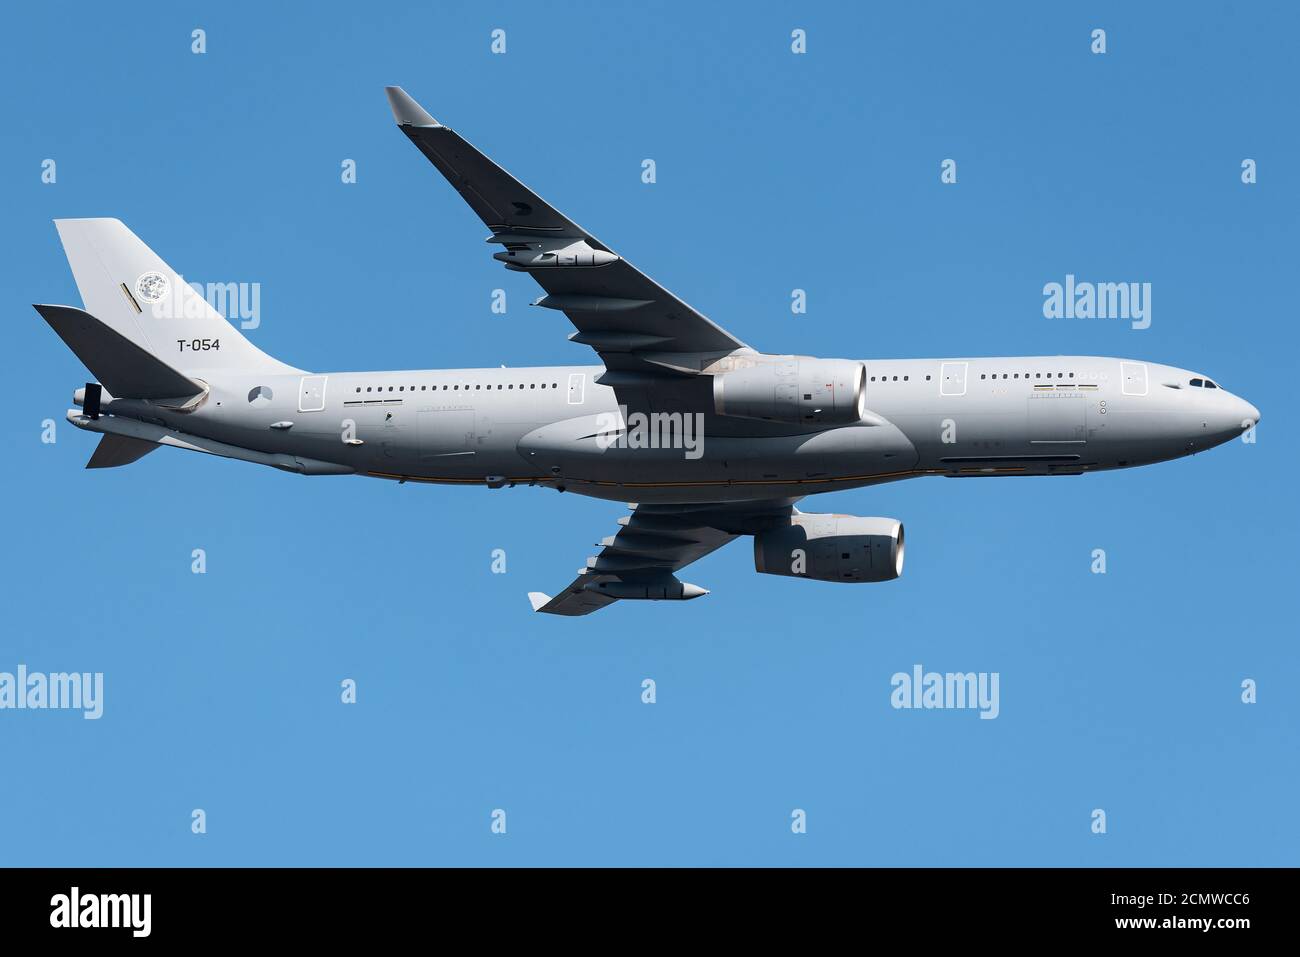 An Airbus A330 MRTT aerial refuelling tanker of the Royal Netherlands Air Force. Stock Photo